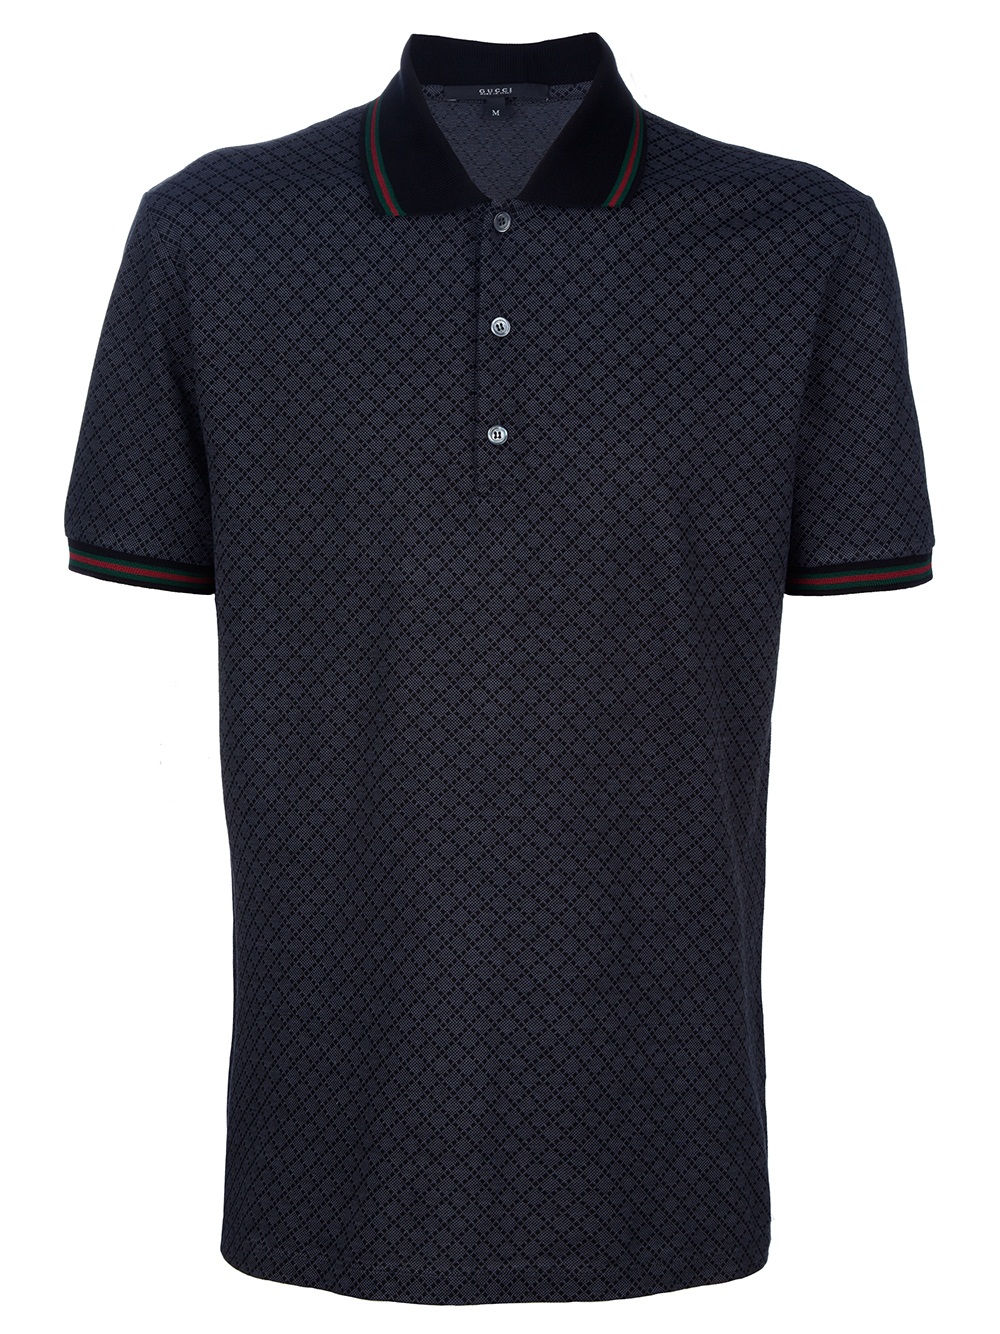 Gucci Checked Polo Shirt in Black for Men | Lyst